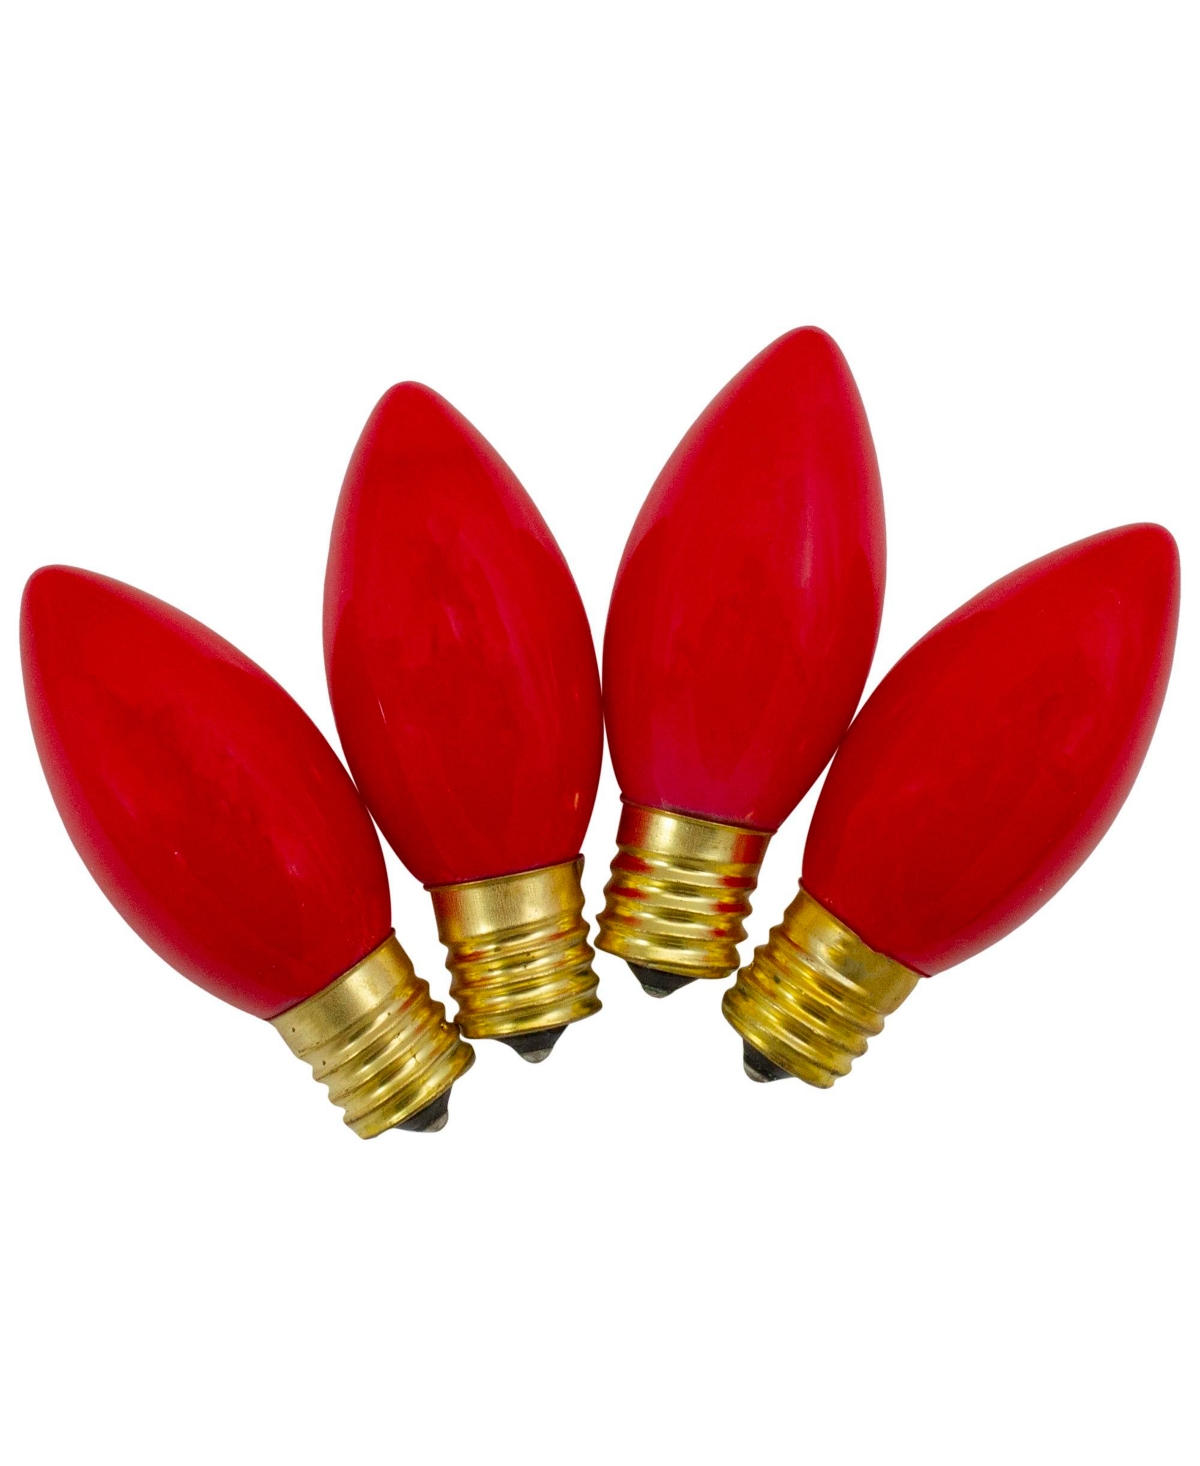 Northlight 3" C9 Opaque Christmas Replacement Bulbs, Set Of 4 In Red